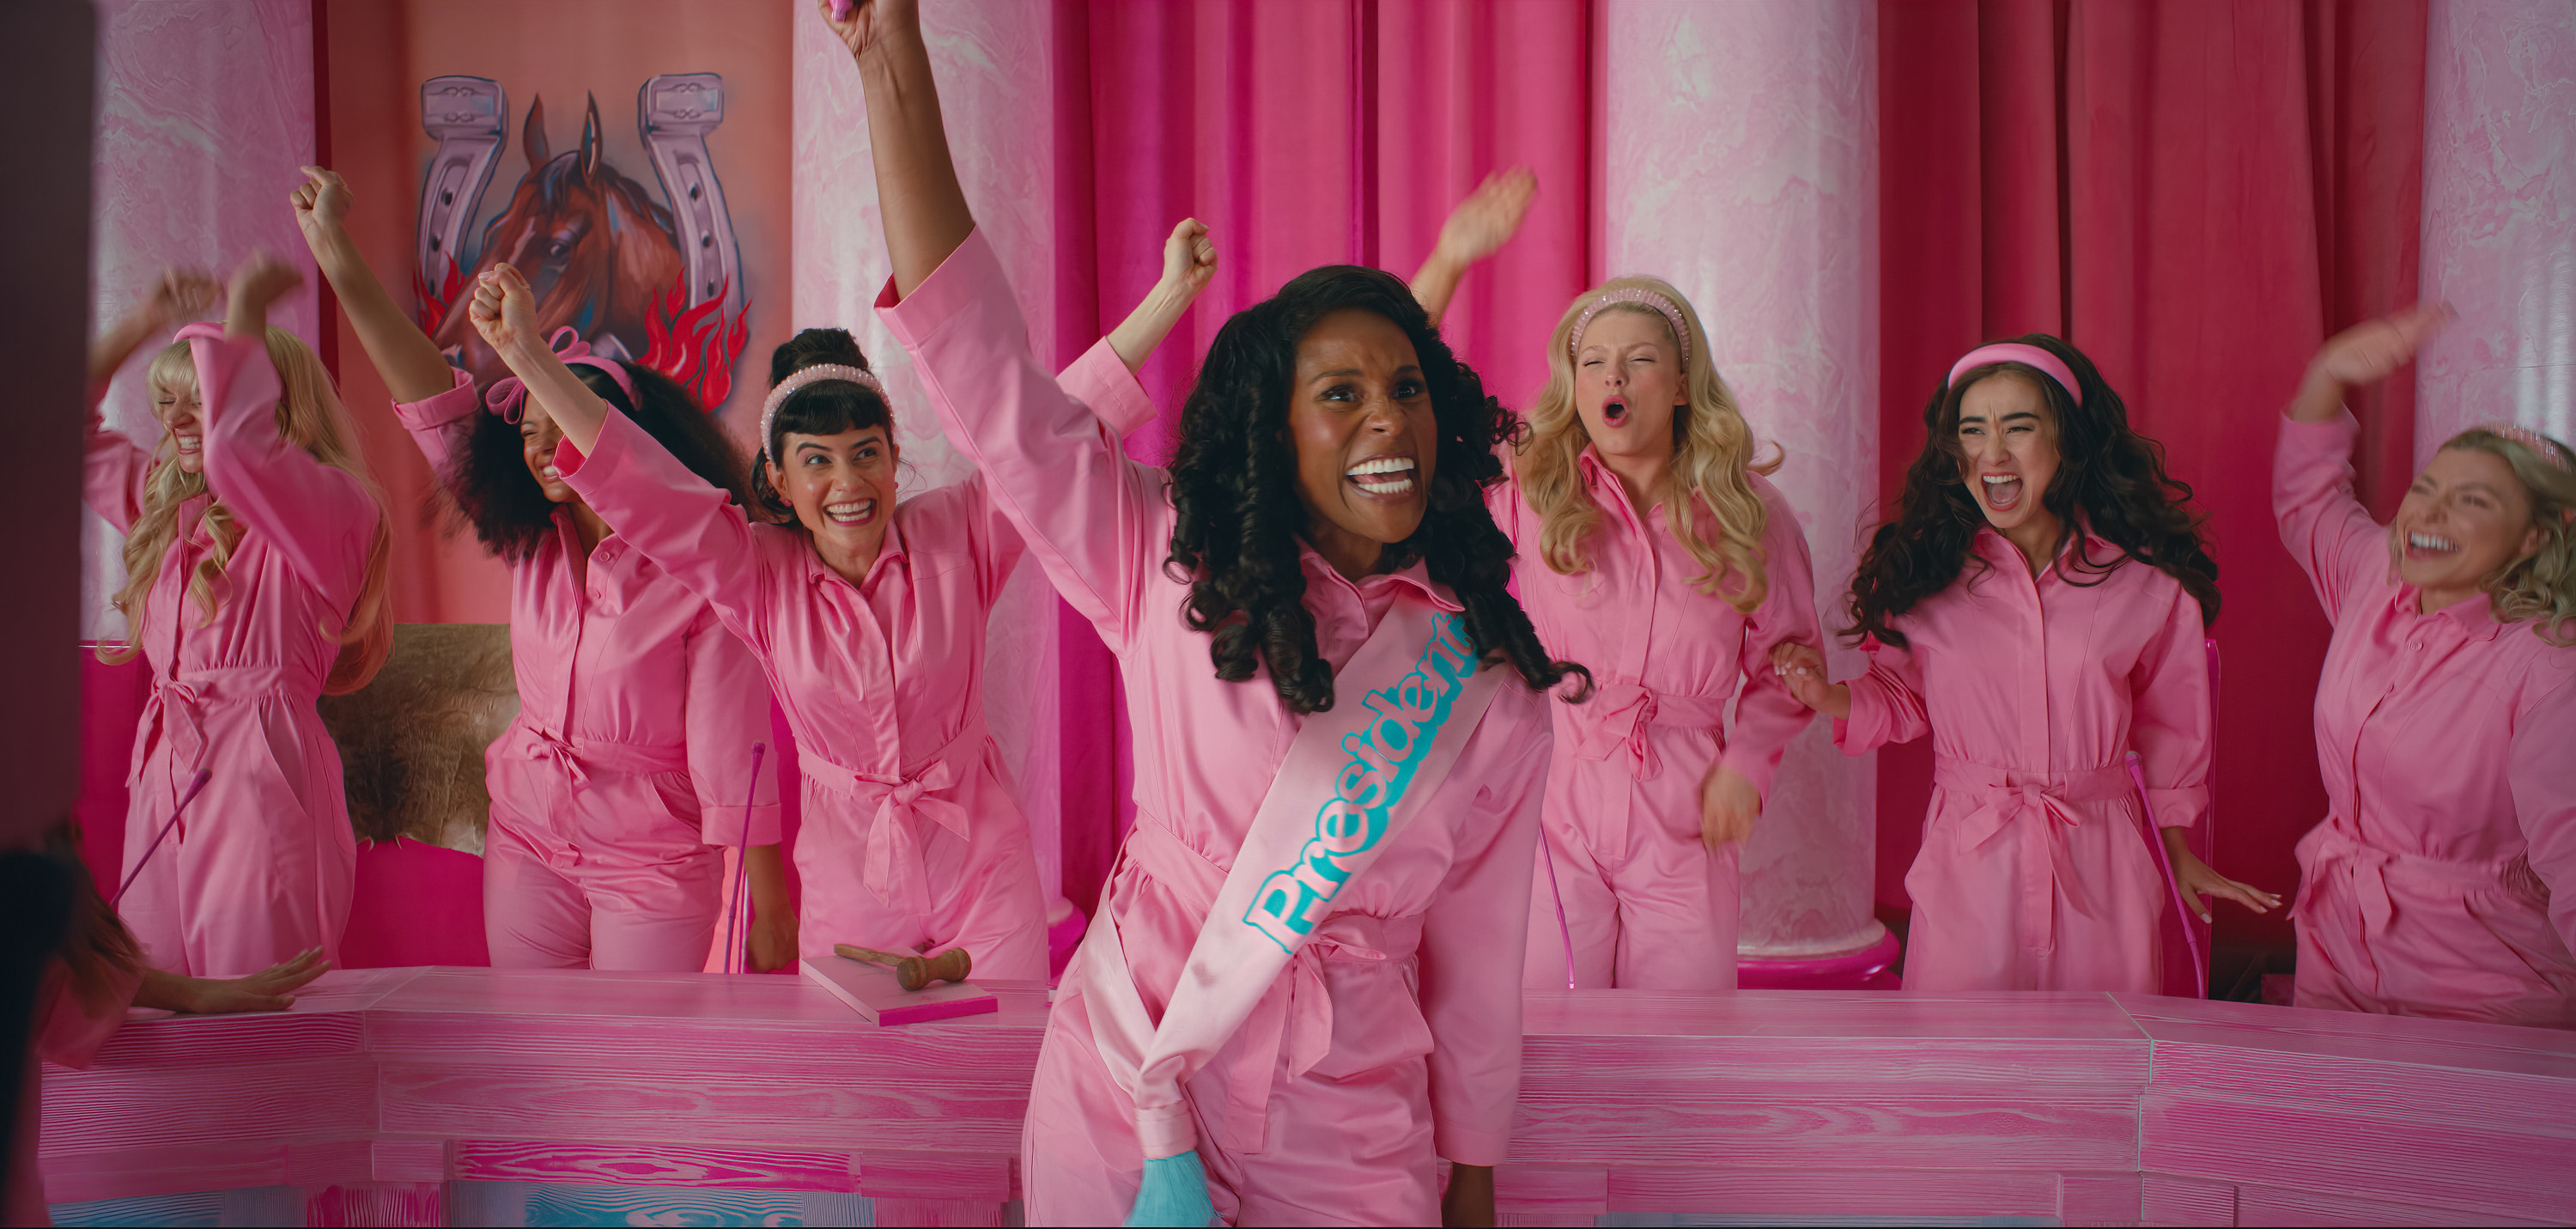 Issa smiling with her arm raised and wearing a &quot;President&quot; sash with other Barbies behind hi=er